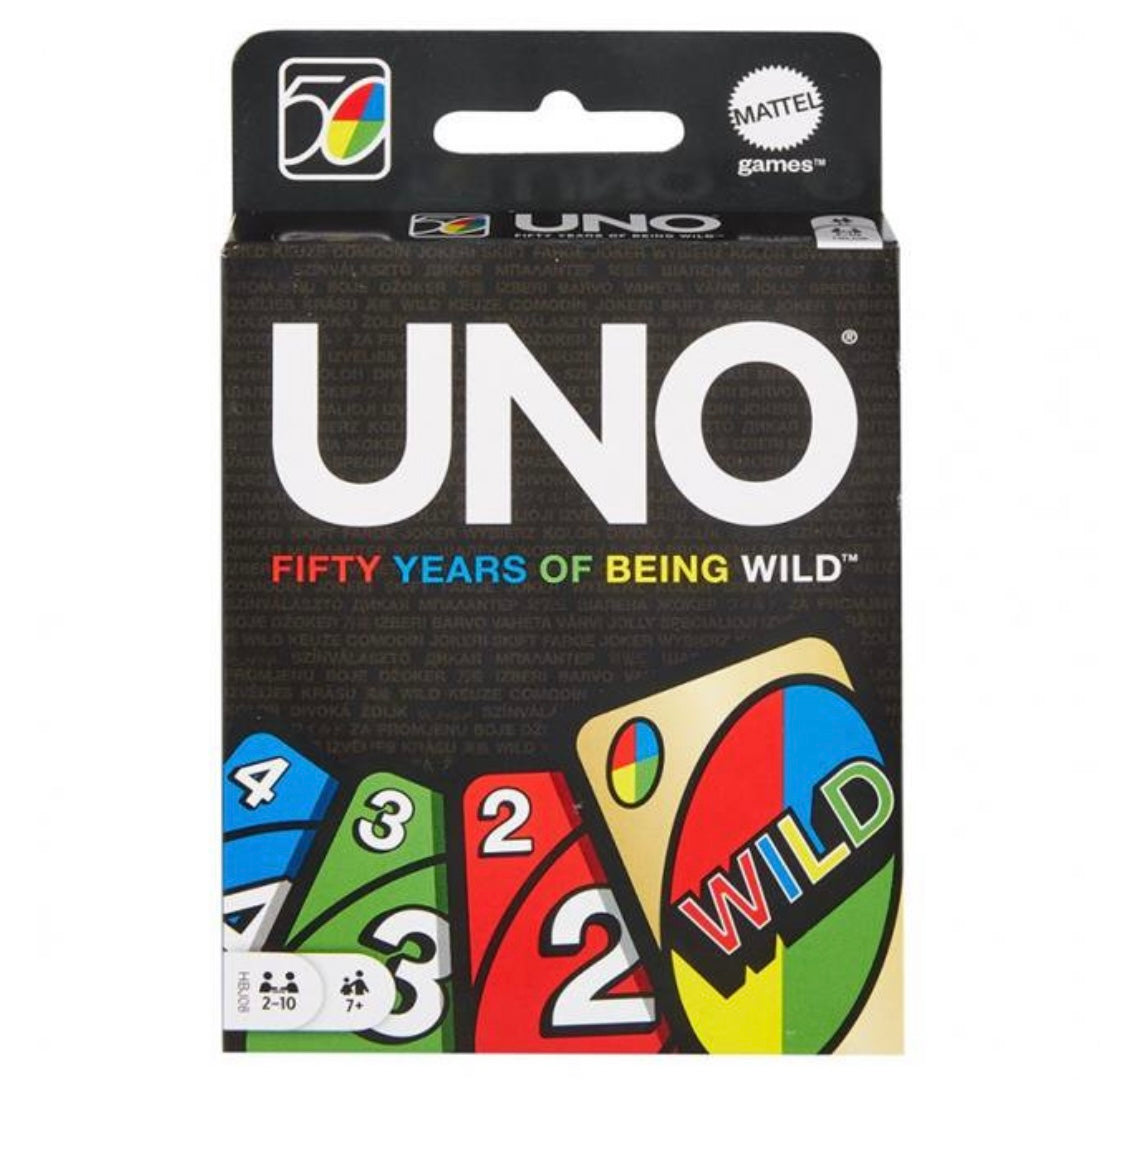 Uno Fifty Years of Being Wild